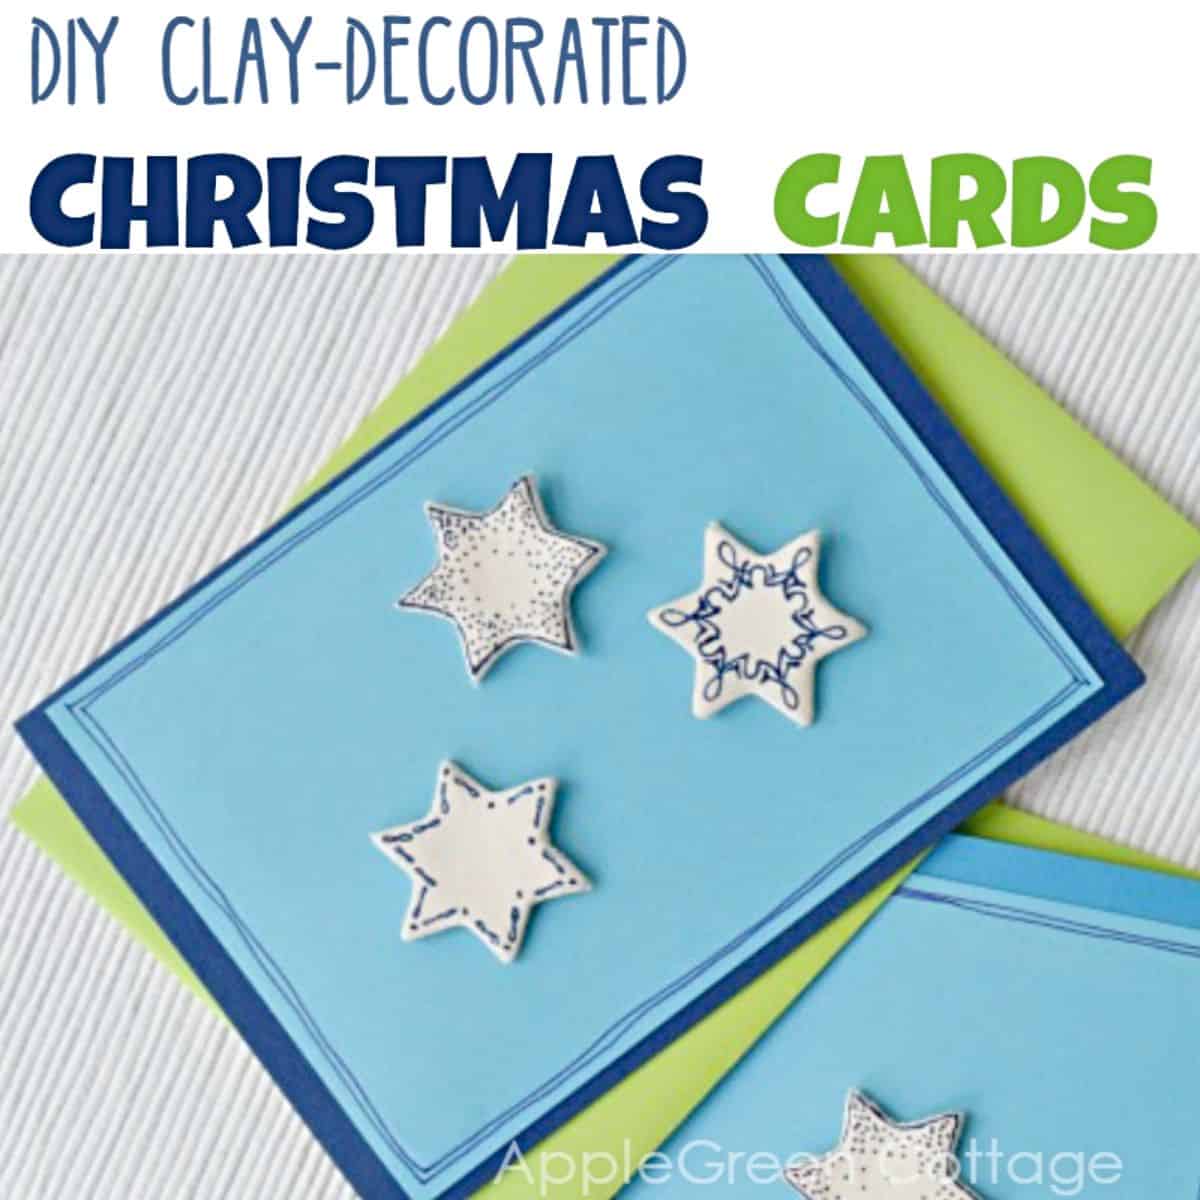 finished air dry clay christmas cards with embellishments on blue cardstock